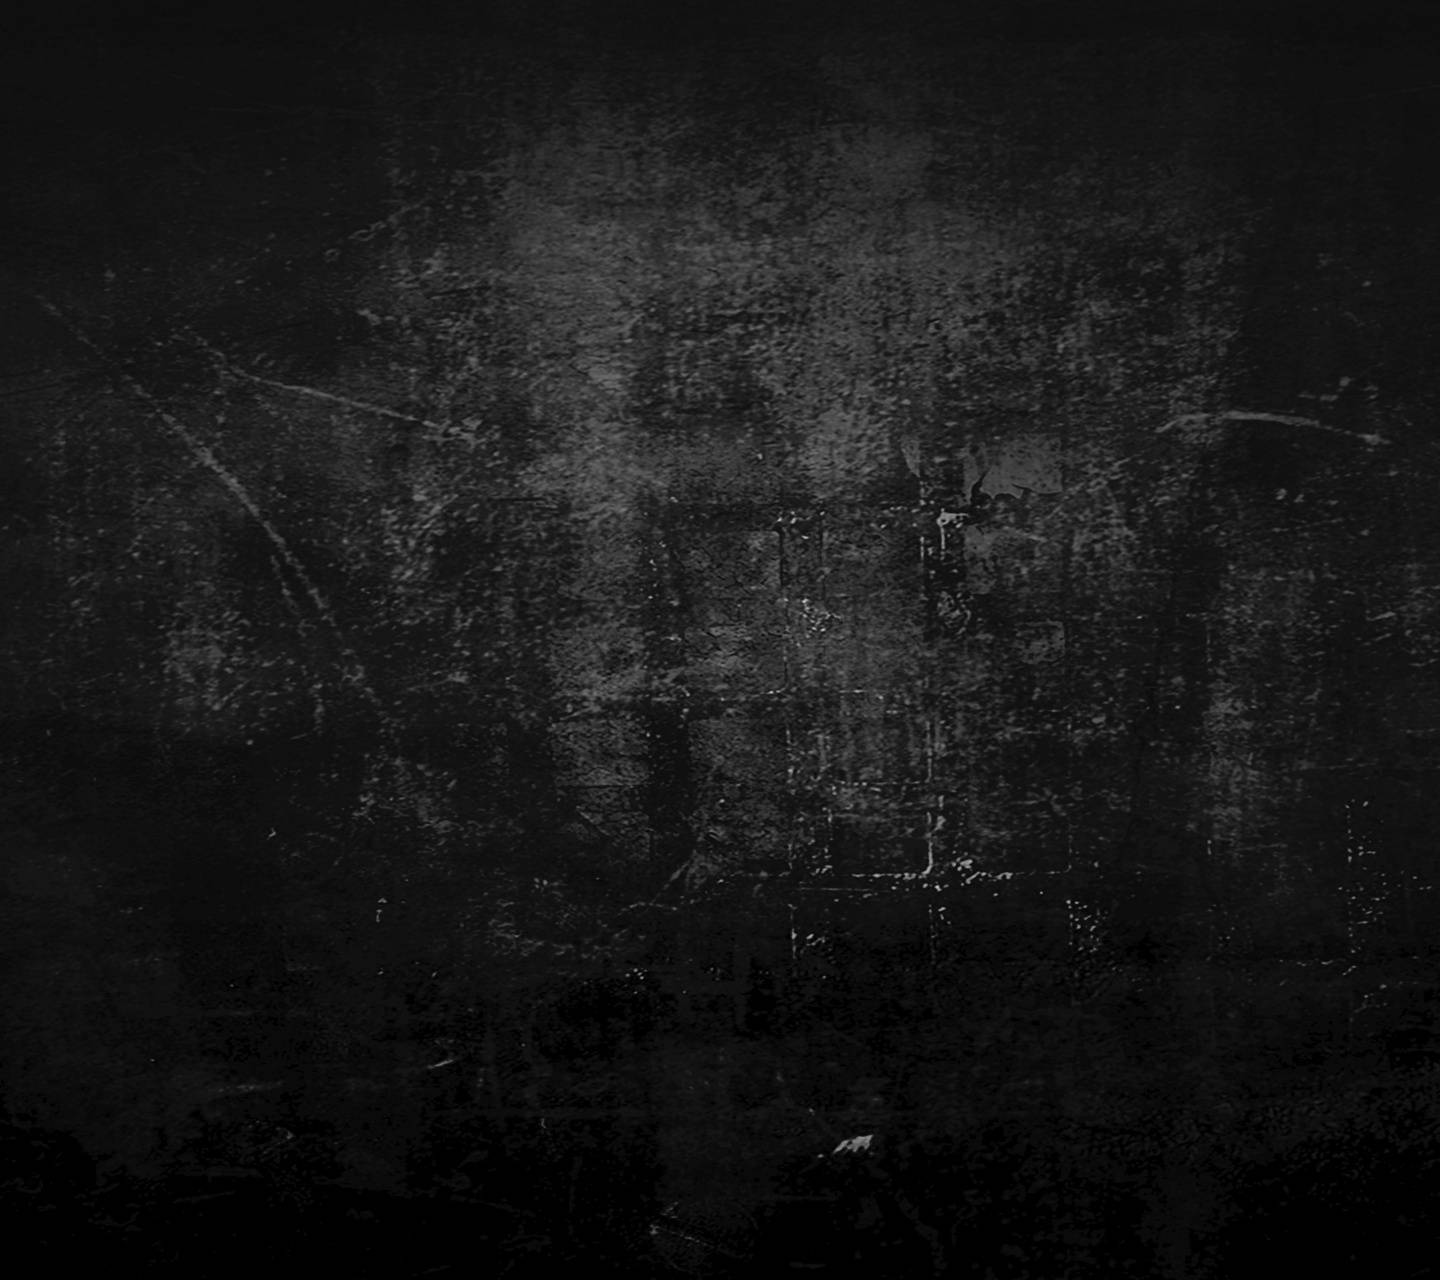 Dark Concrete Images  Free Photos PNG Stickers Wallpapers  Backgrounds   rawpixel